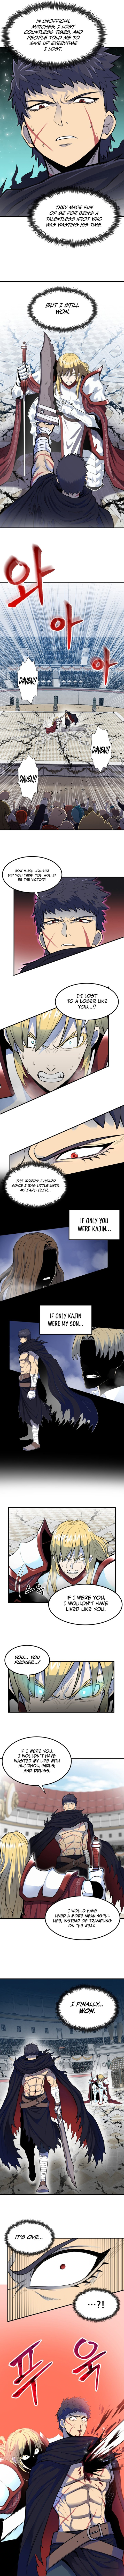 Standard of Reincarnation - Chapter 1 Page 10